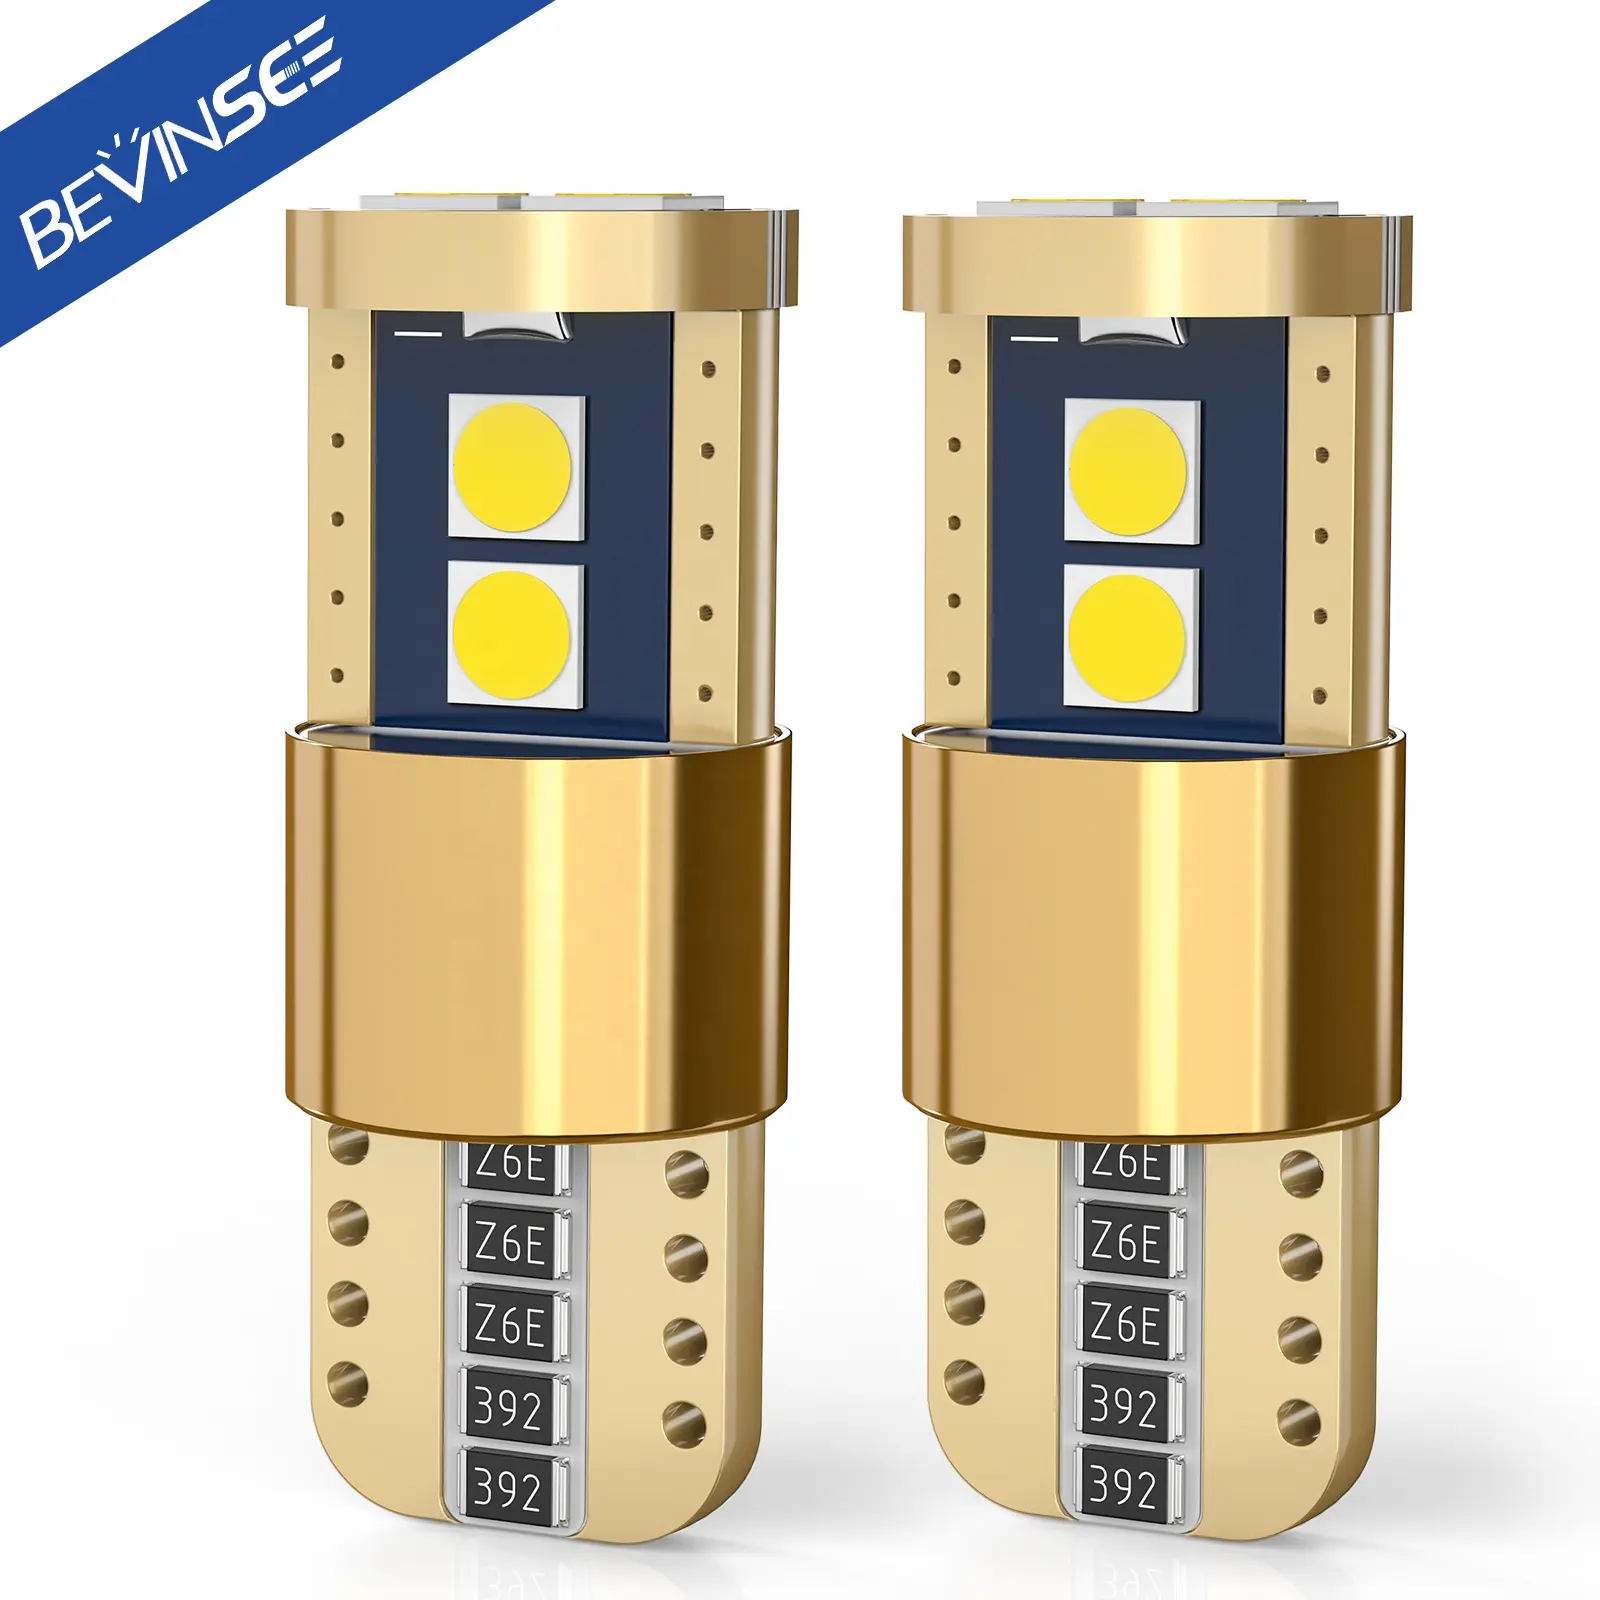 Bevinsee 2 Pcs T10 W5W 194 LED Bulbs High Power Chip Instrument Lights White Beam 6500K